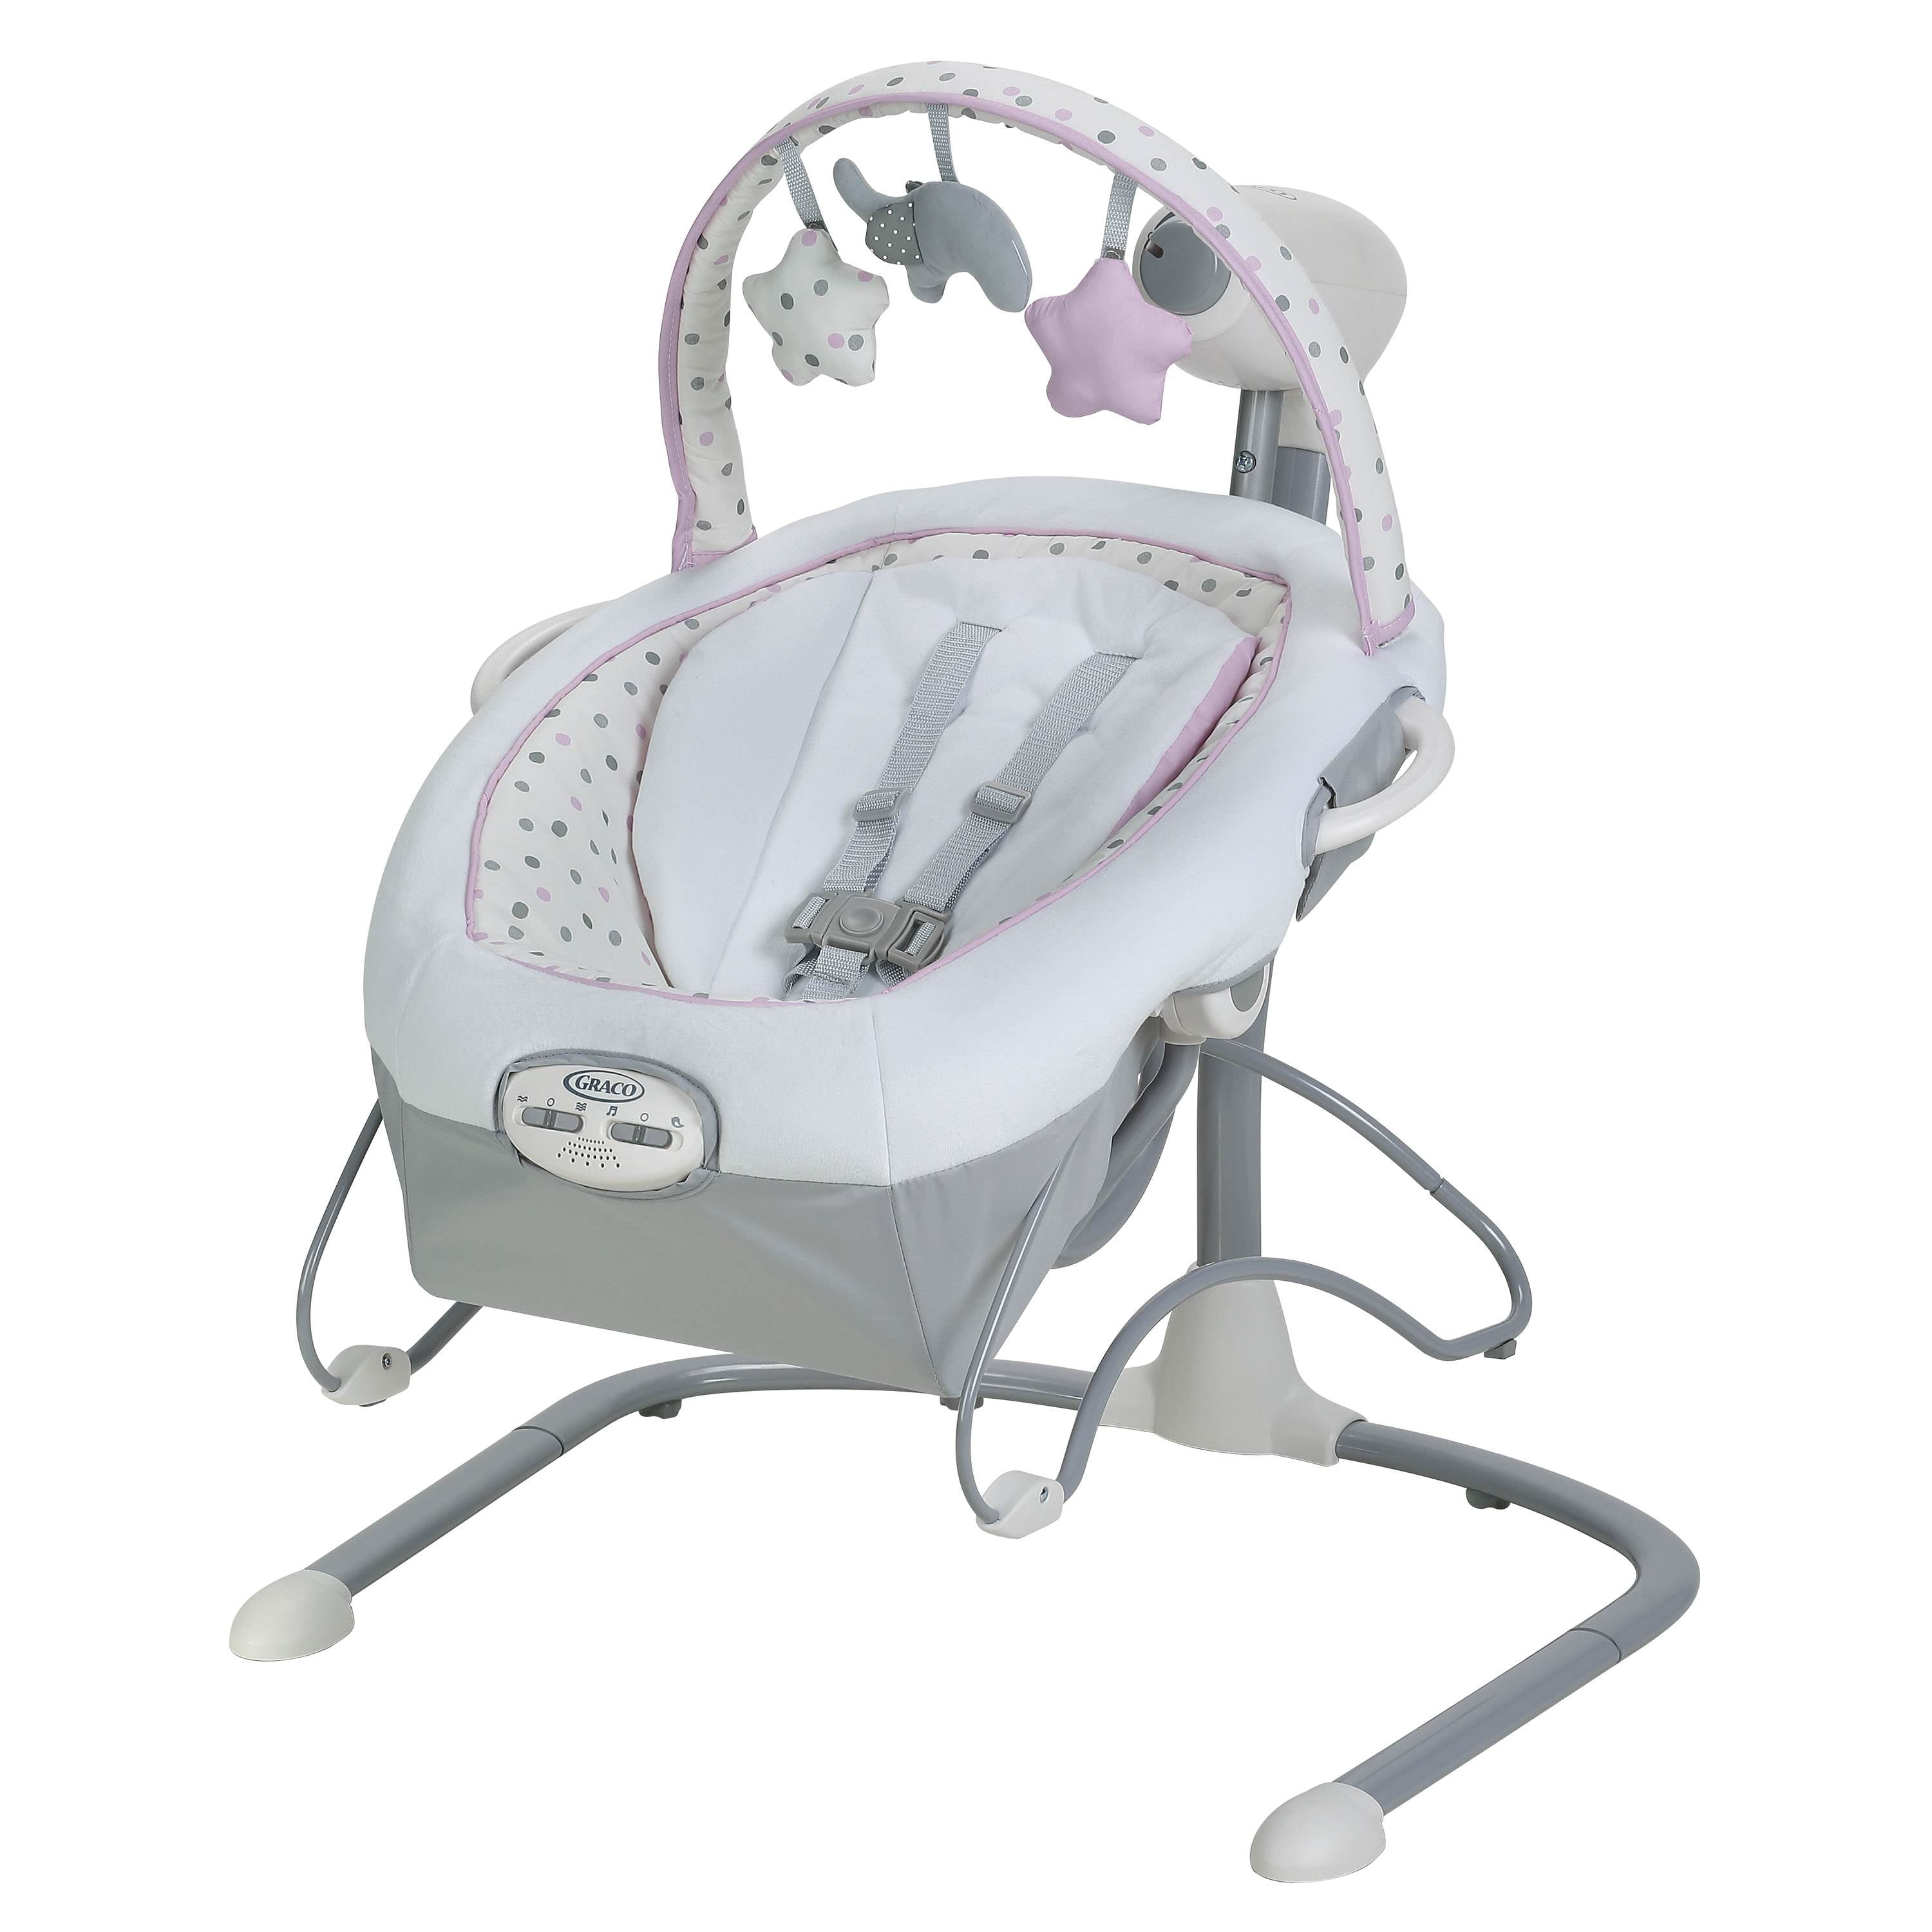 graco duet glider lx swing with portable sleeper